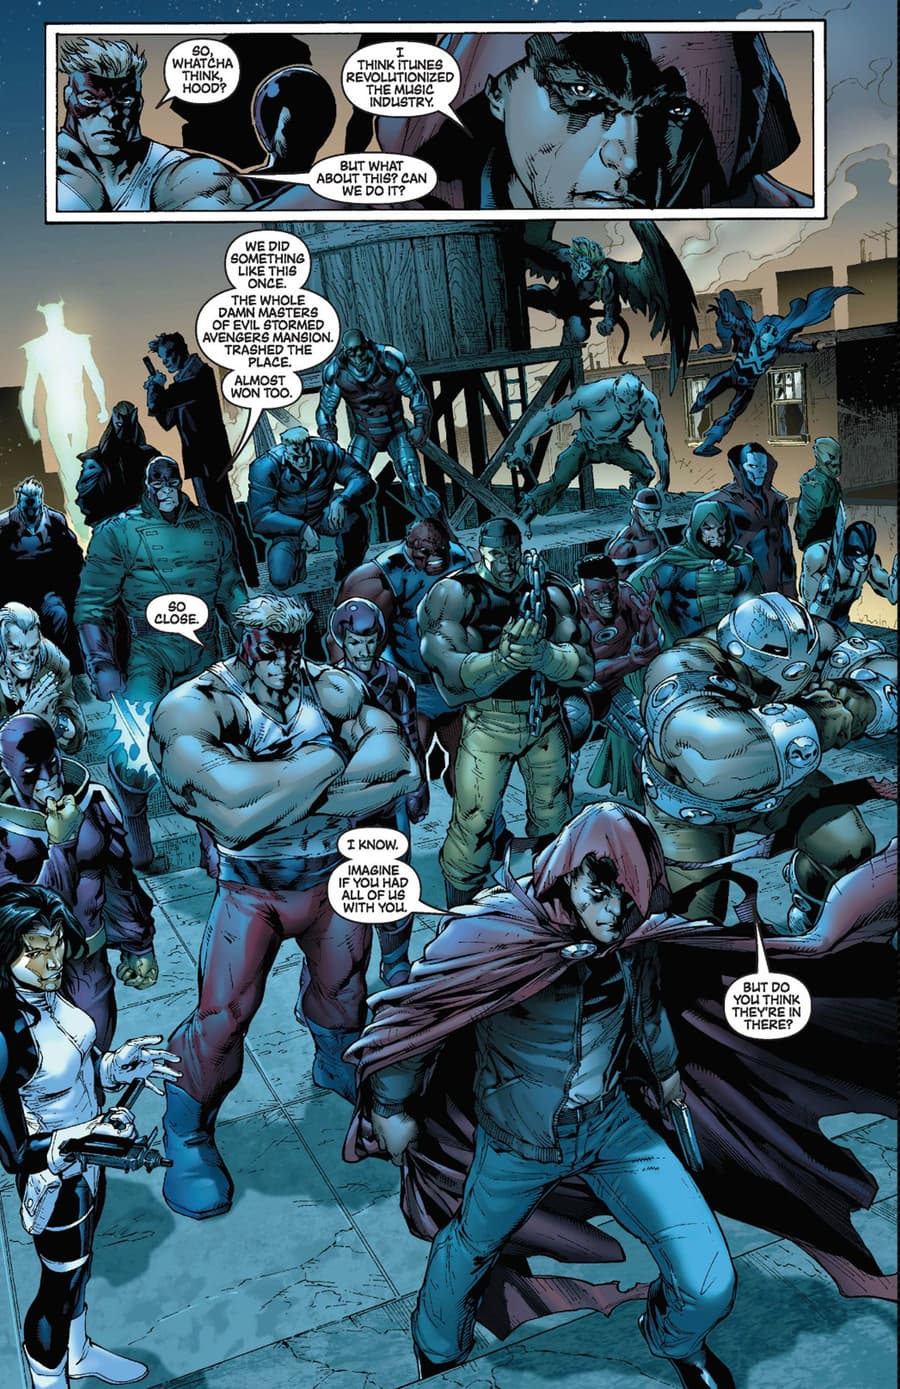 NEW AVENGERS ANNUAL (2006) #2 page by Brian Michael Bendis and Carlo Pagulayan